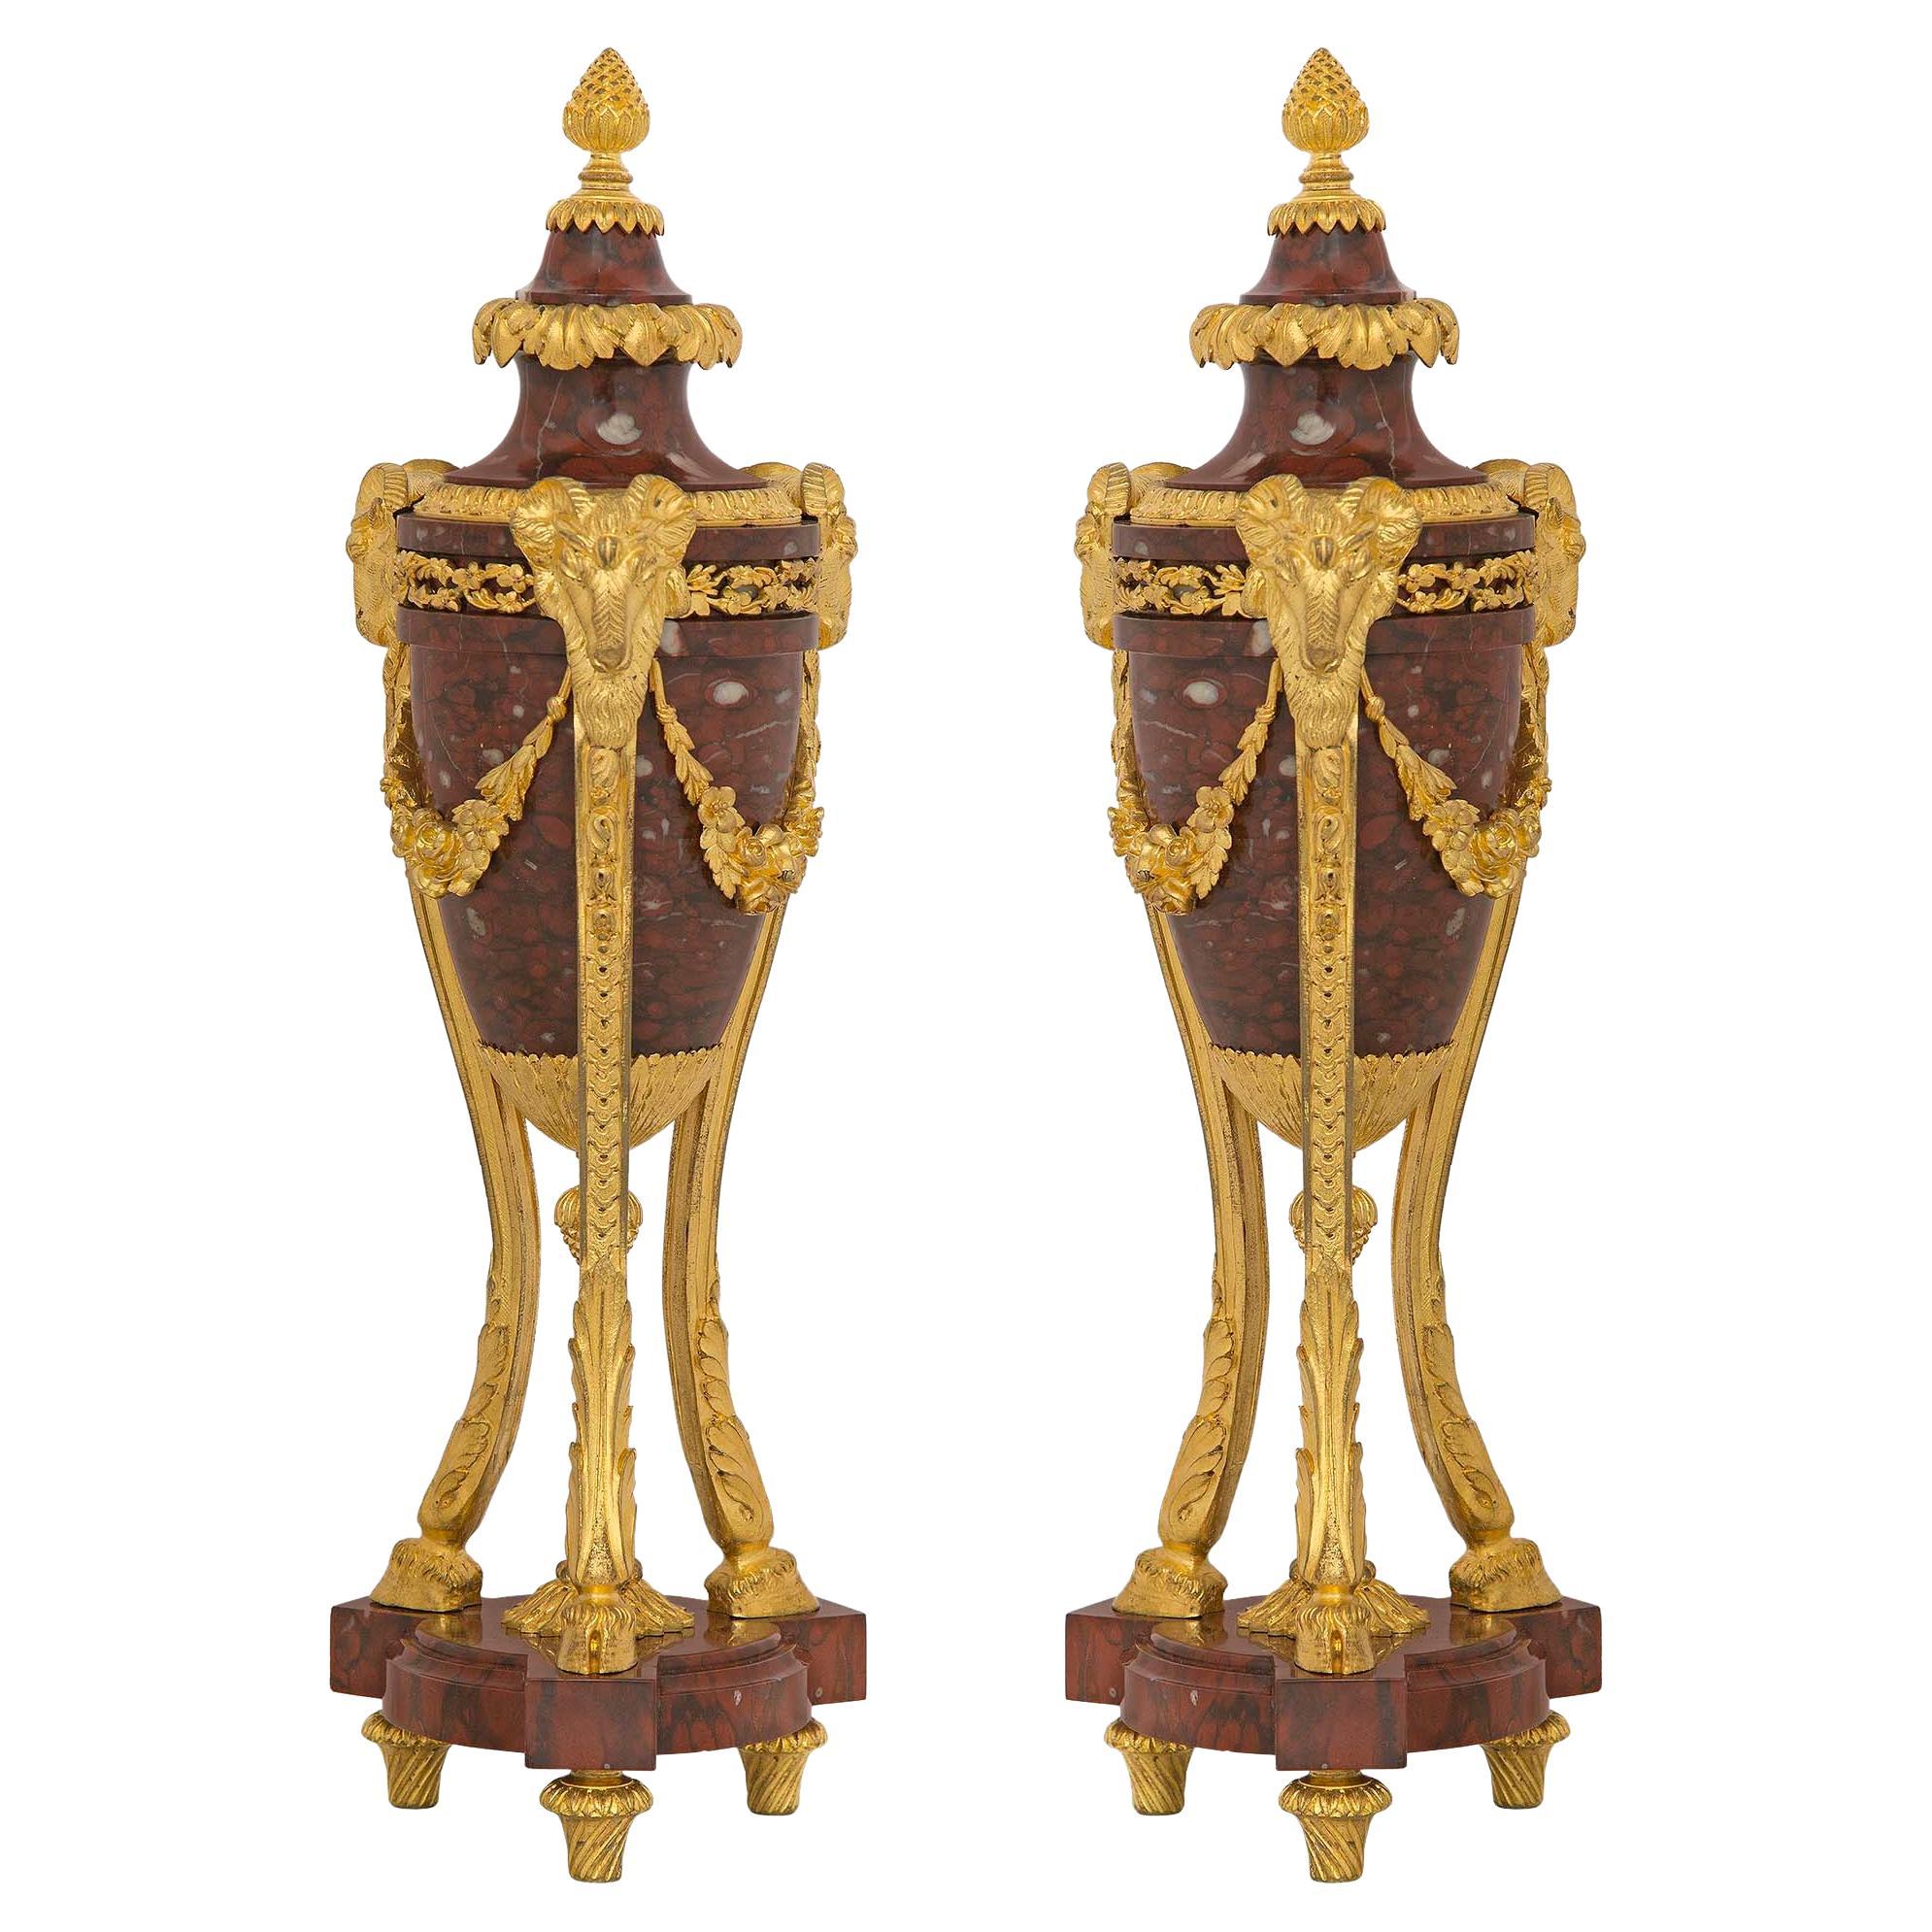 Pair of French 19th Century Louis XVI Style Marble and Ormolu Cassolettes